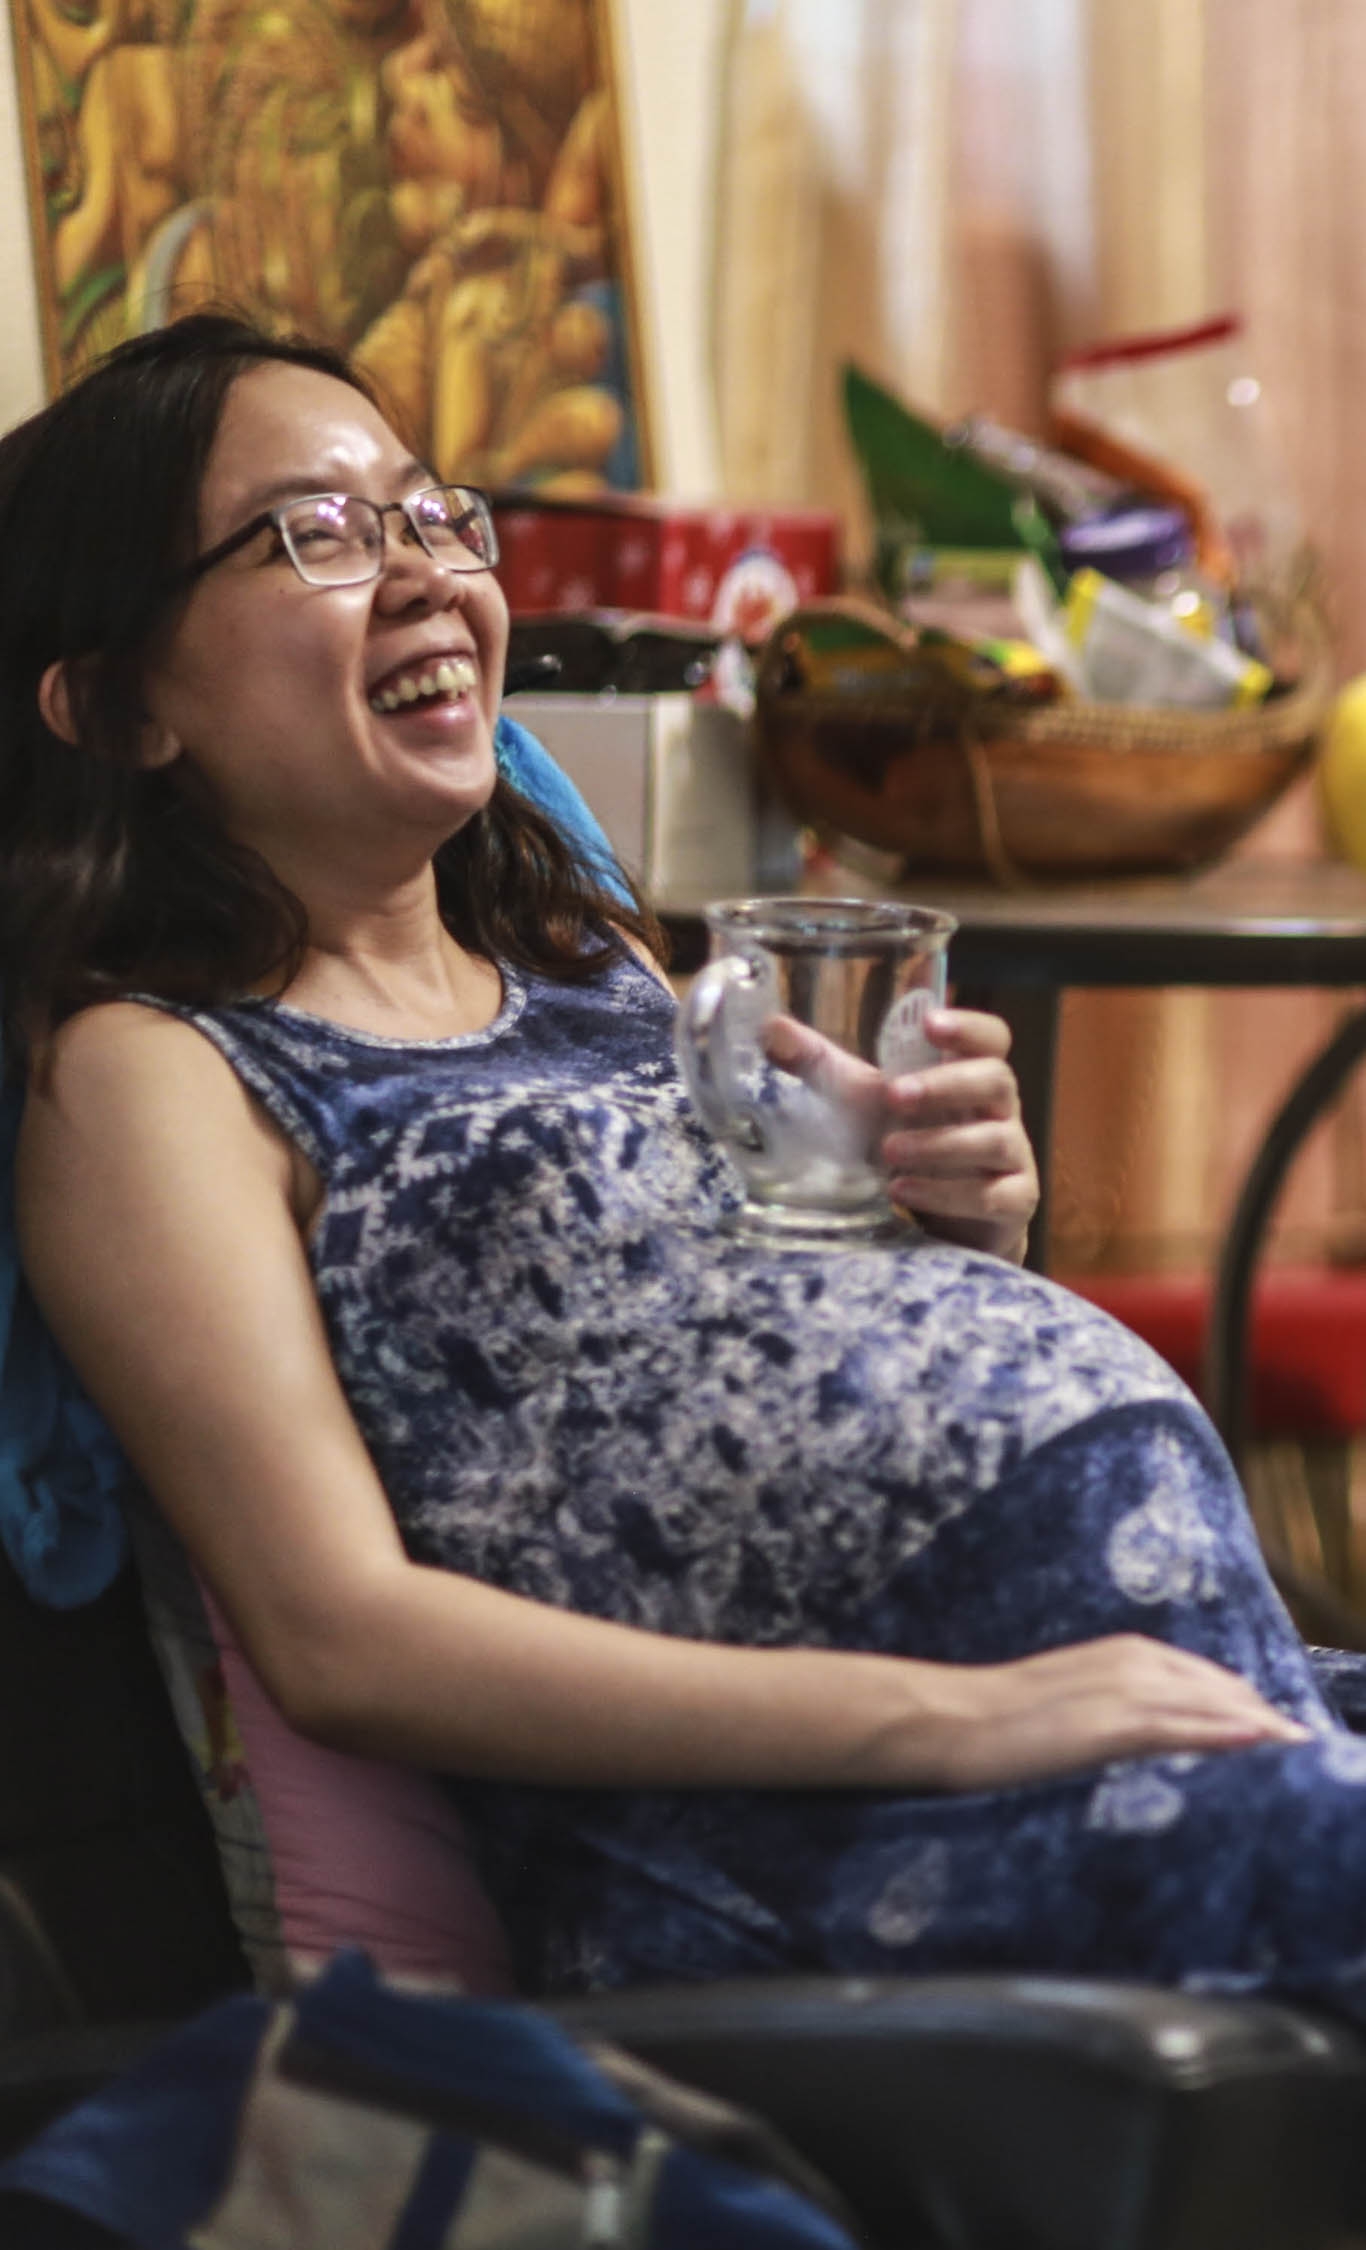 Expanded Maternity Leave Act: ‘A victory for women, families’